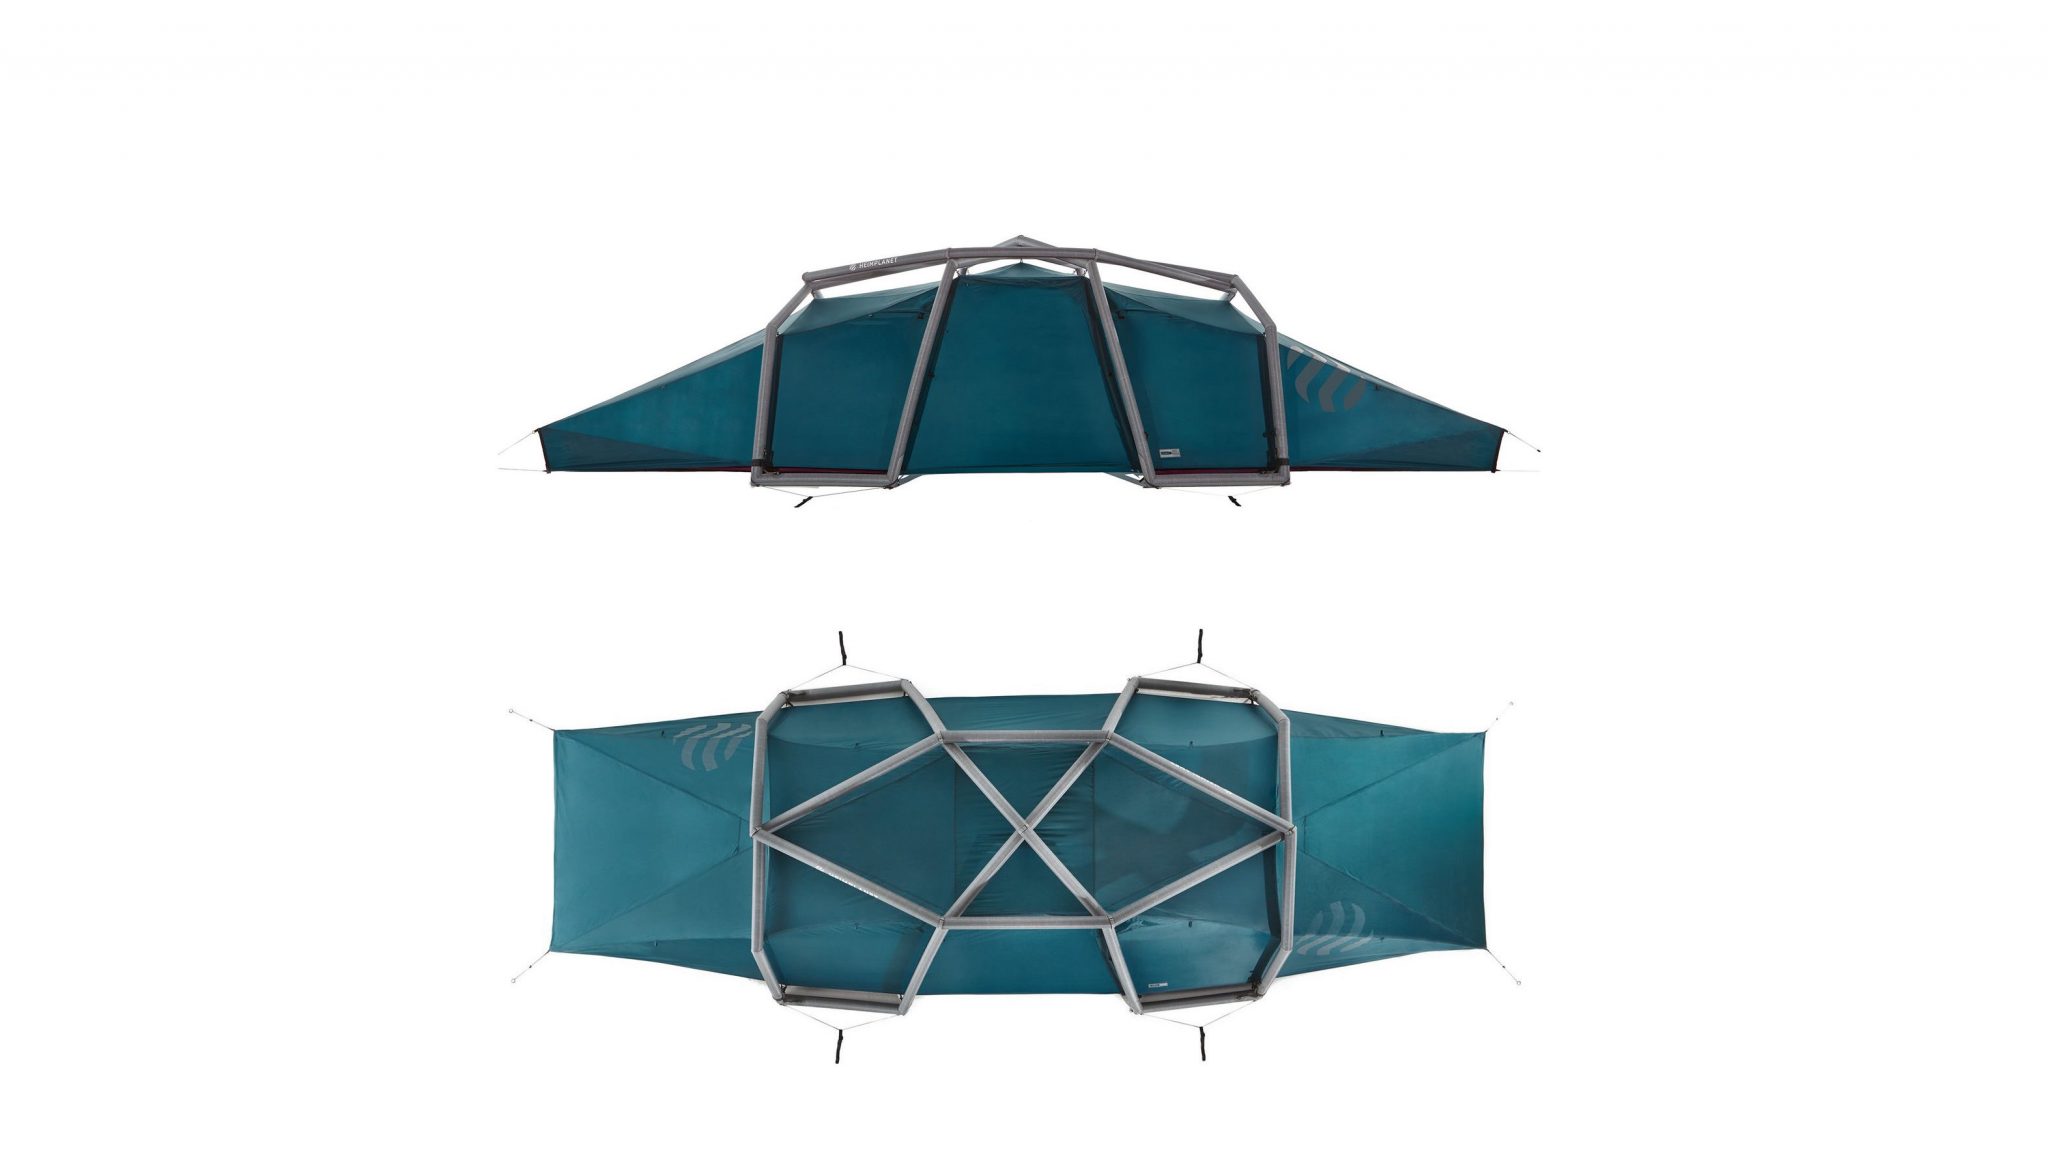 Heimplanet Nias 6-Person Tent